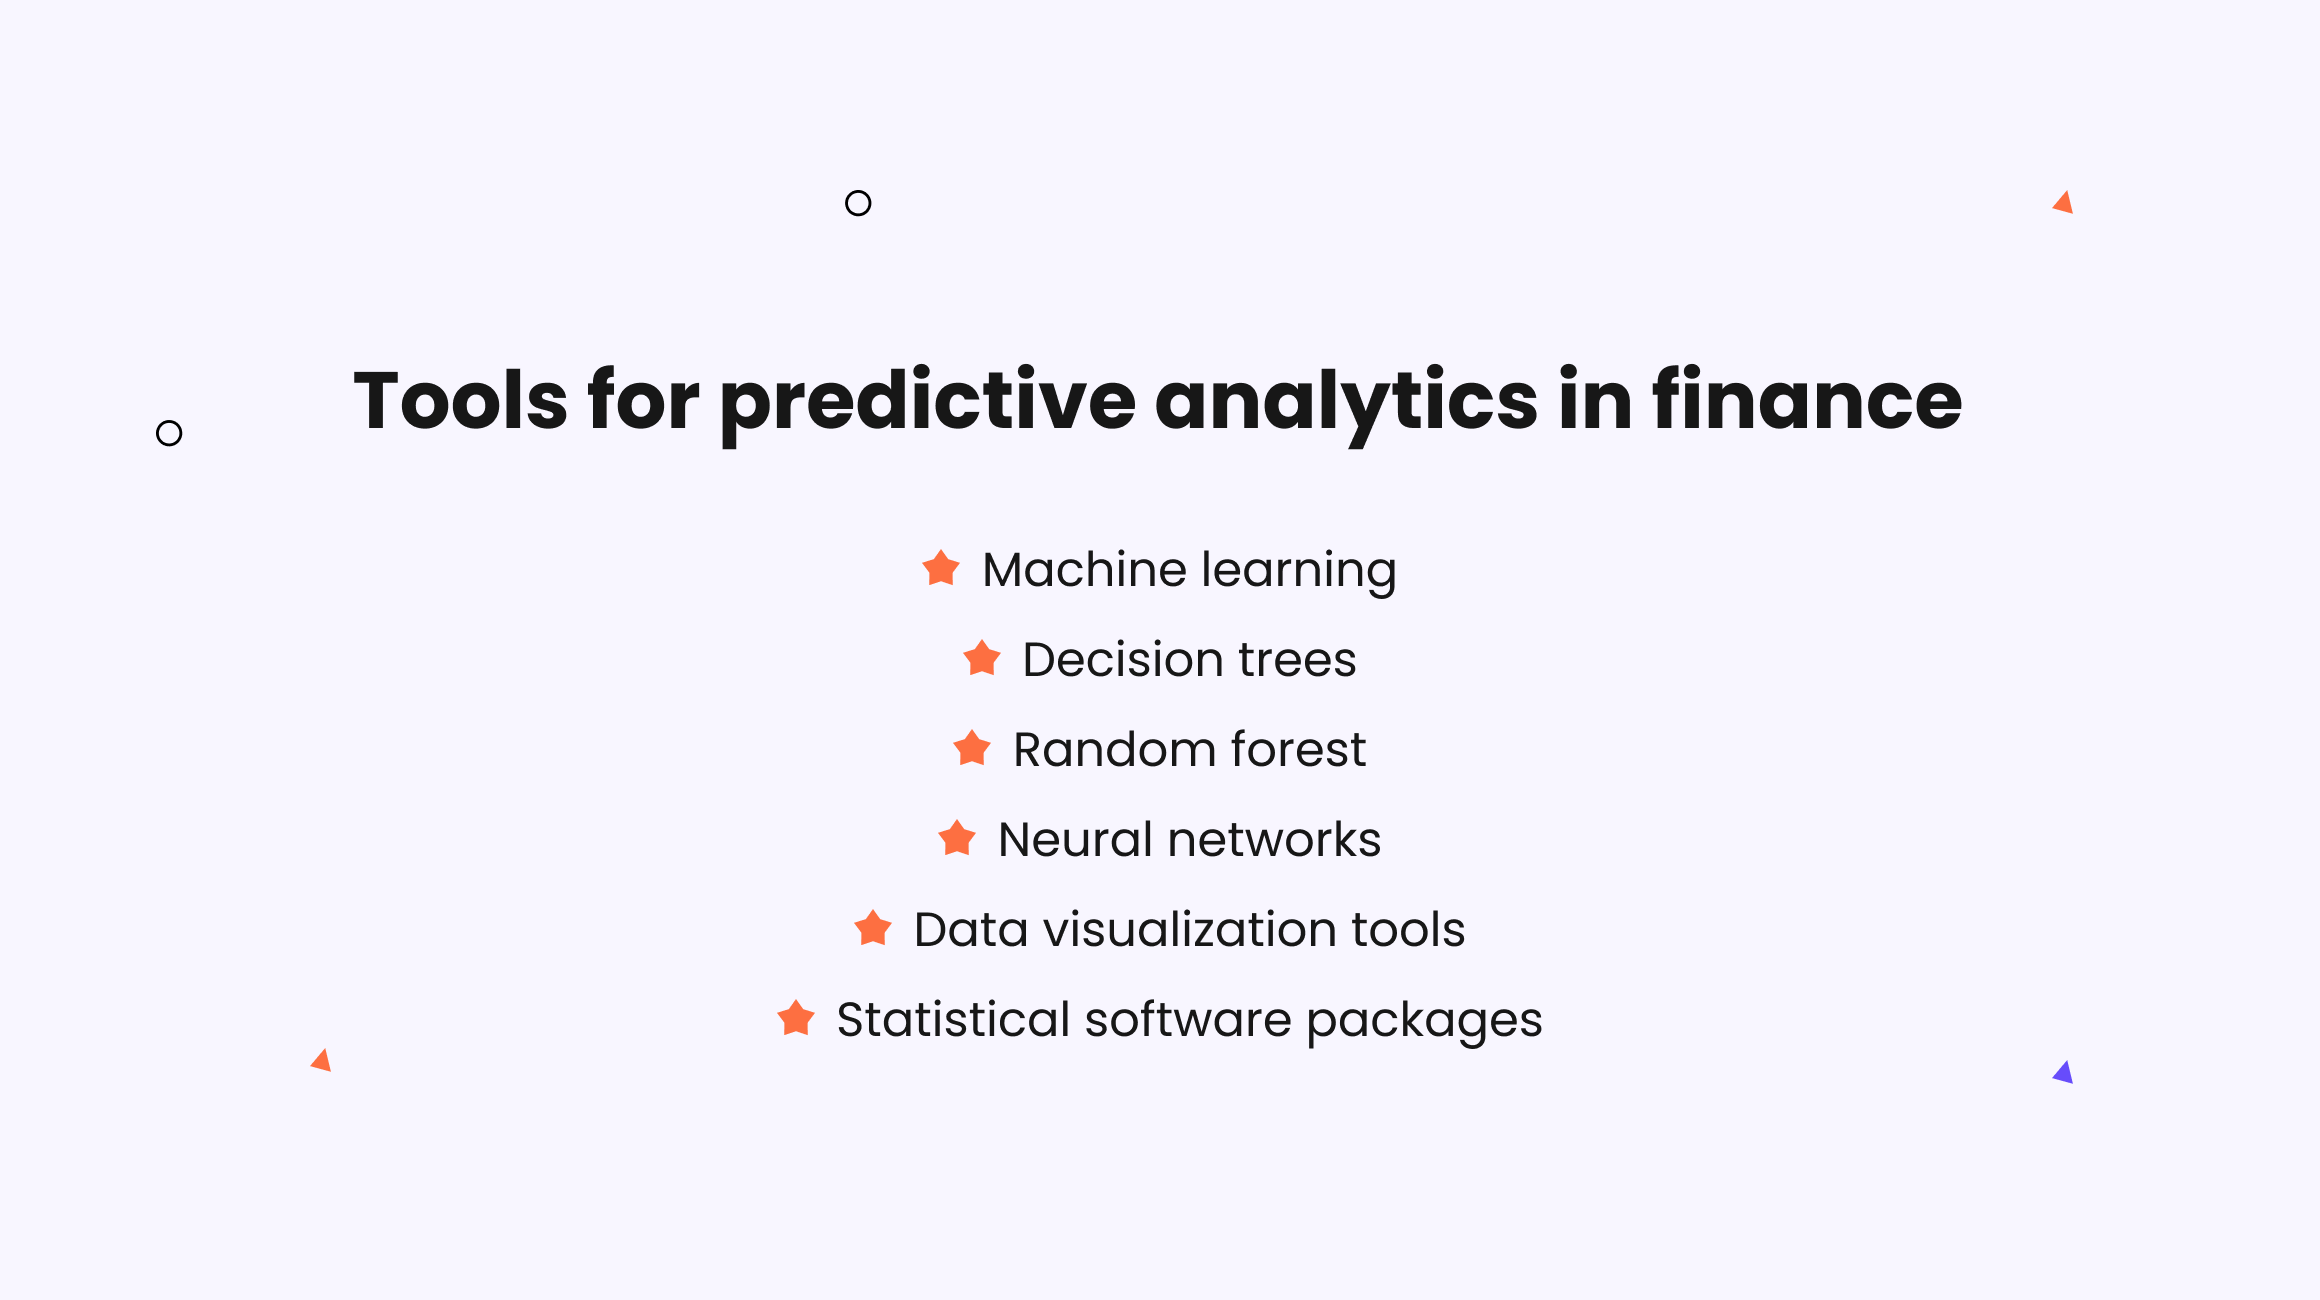 Techniques and tools for predictive analytics in finance